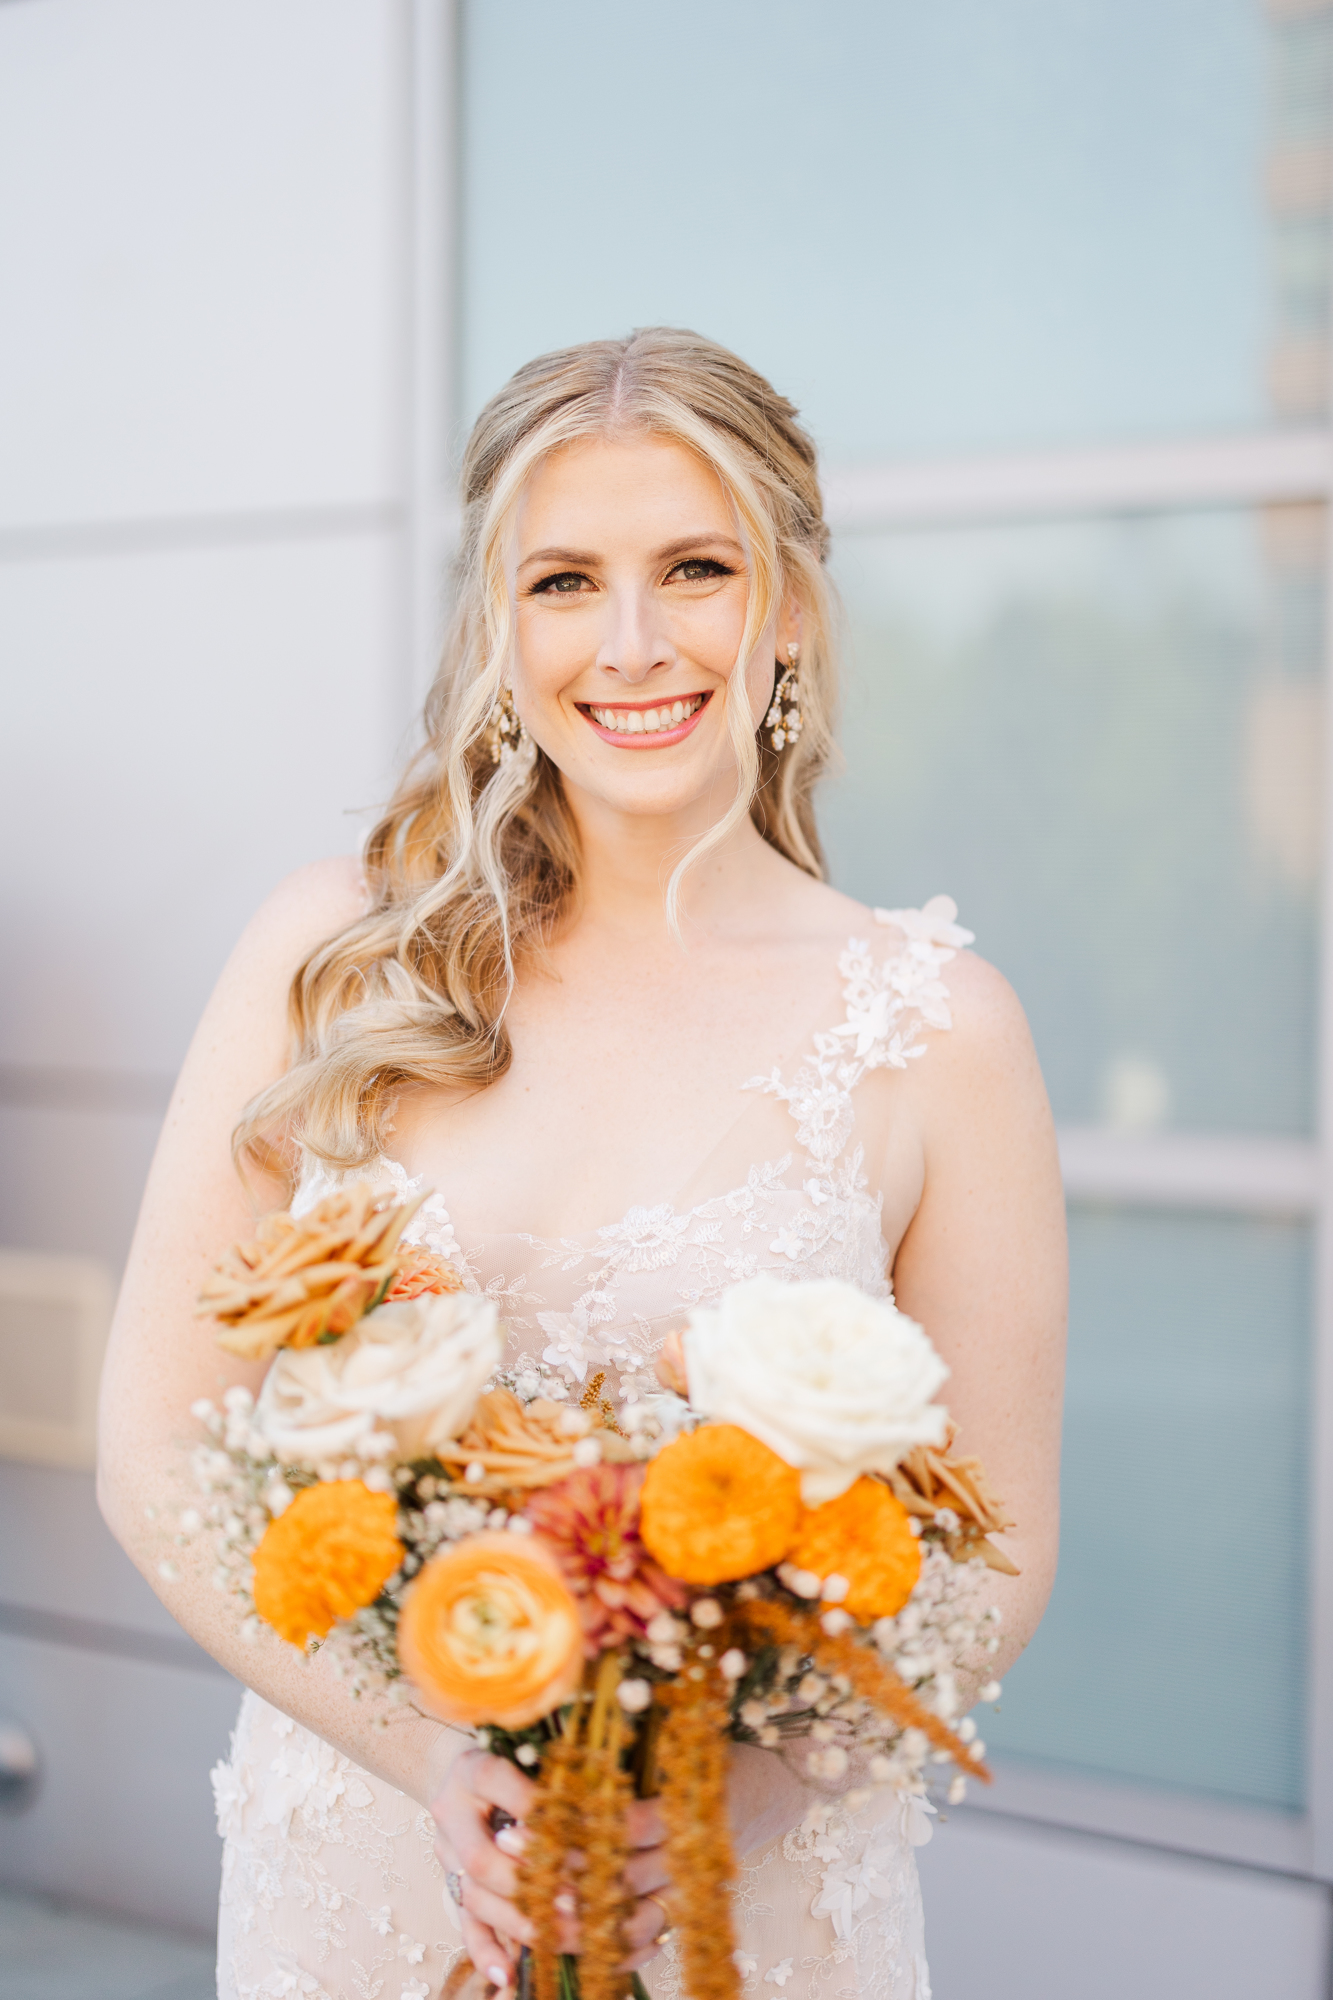 Authentic New Jersey Wedding at W Hoboken